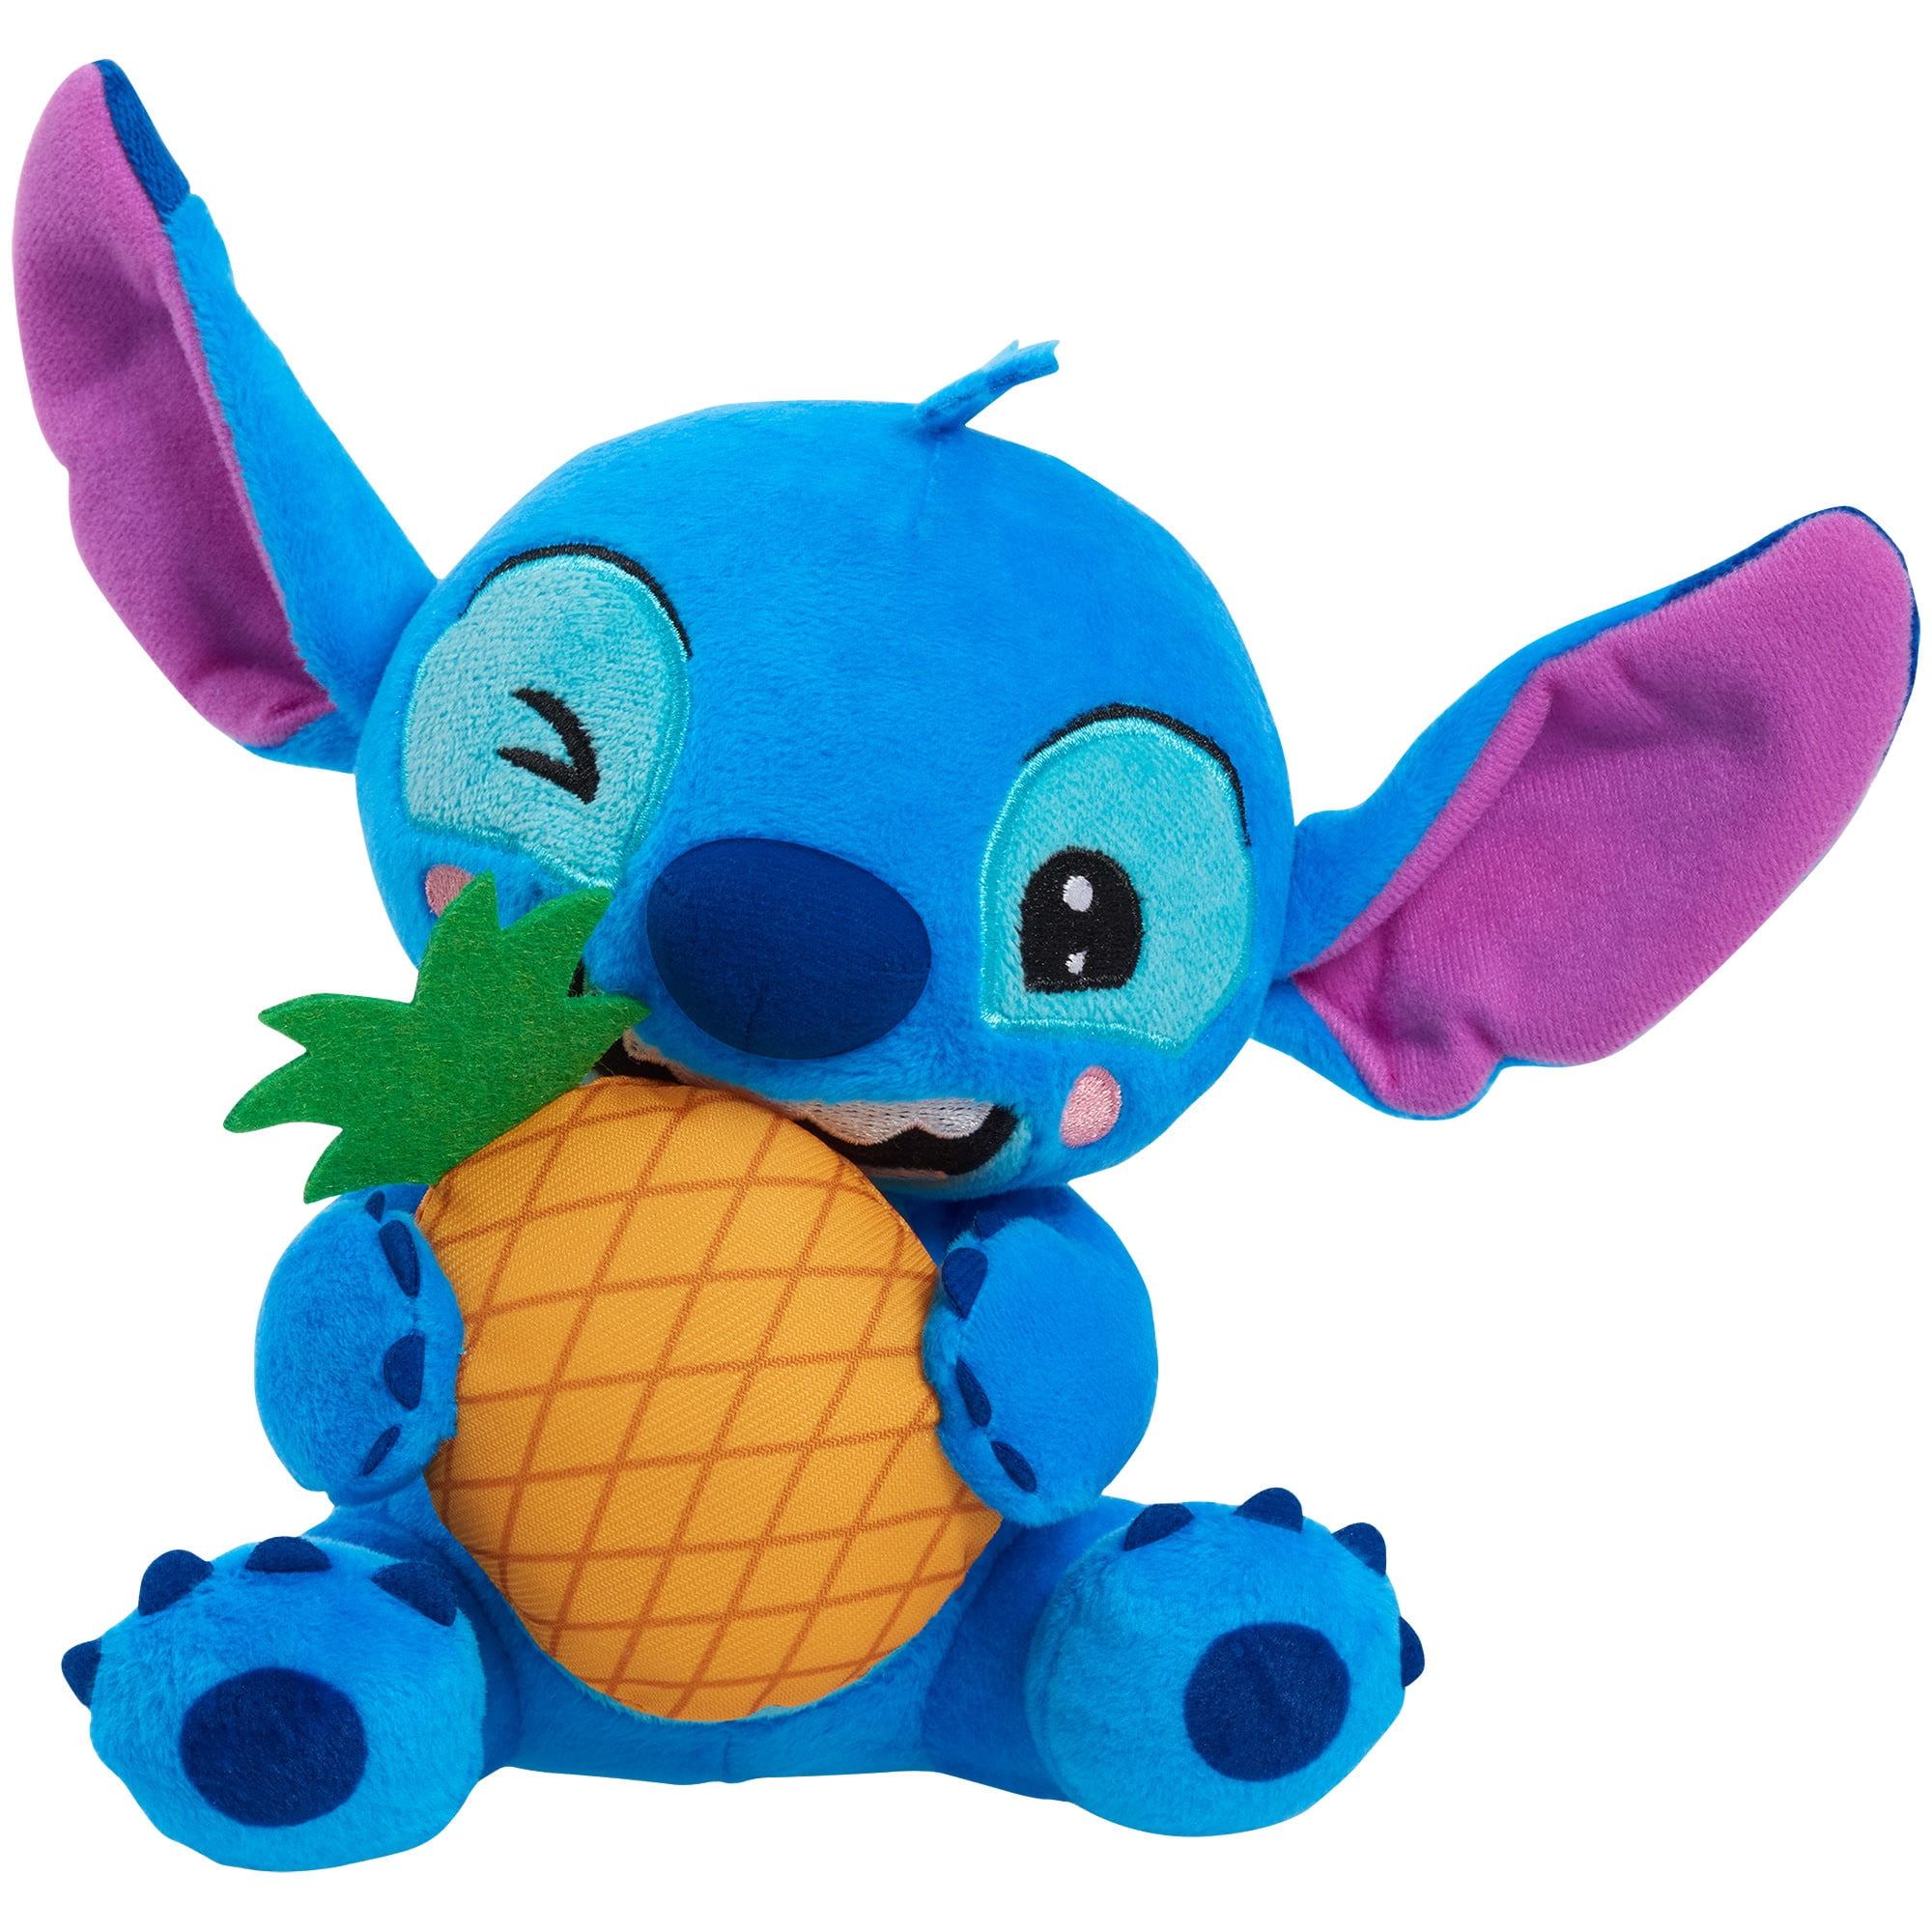 Disney Stitch Small Plush Stitch and Pineapple, Stuffed Animal, Blue, Alien, Officially Licensed Kids Toys for Ages 2 Up, Easter Basket Stuffers and Small Gifts